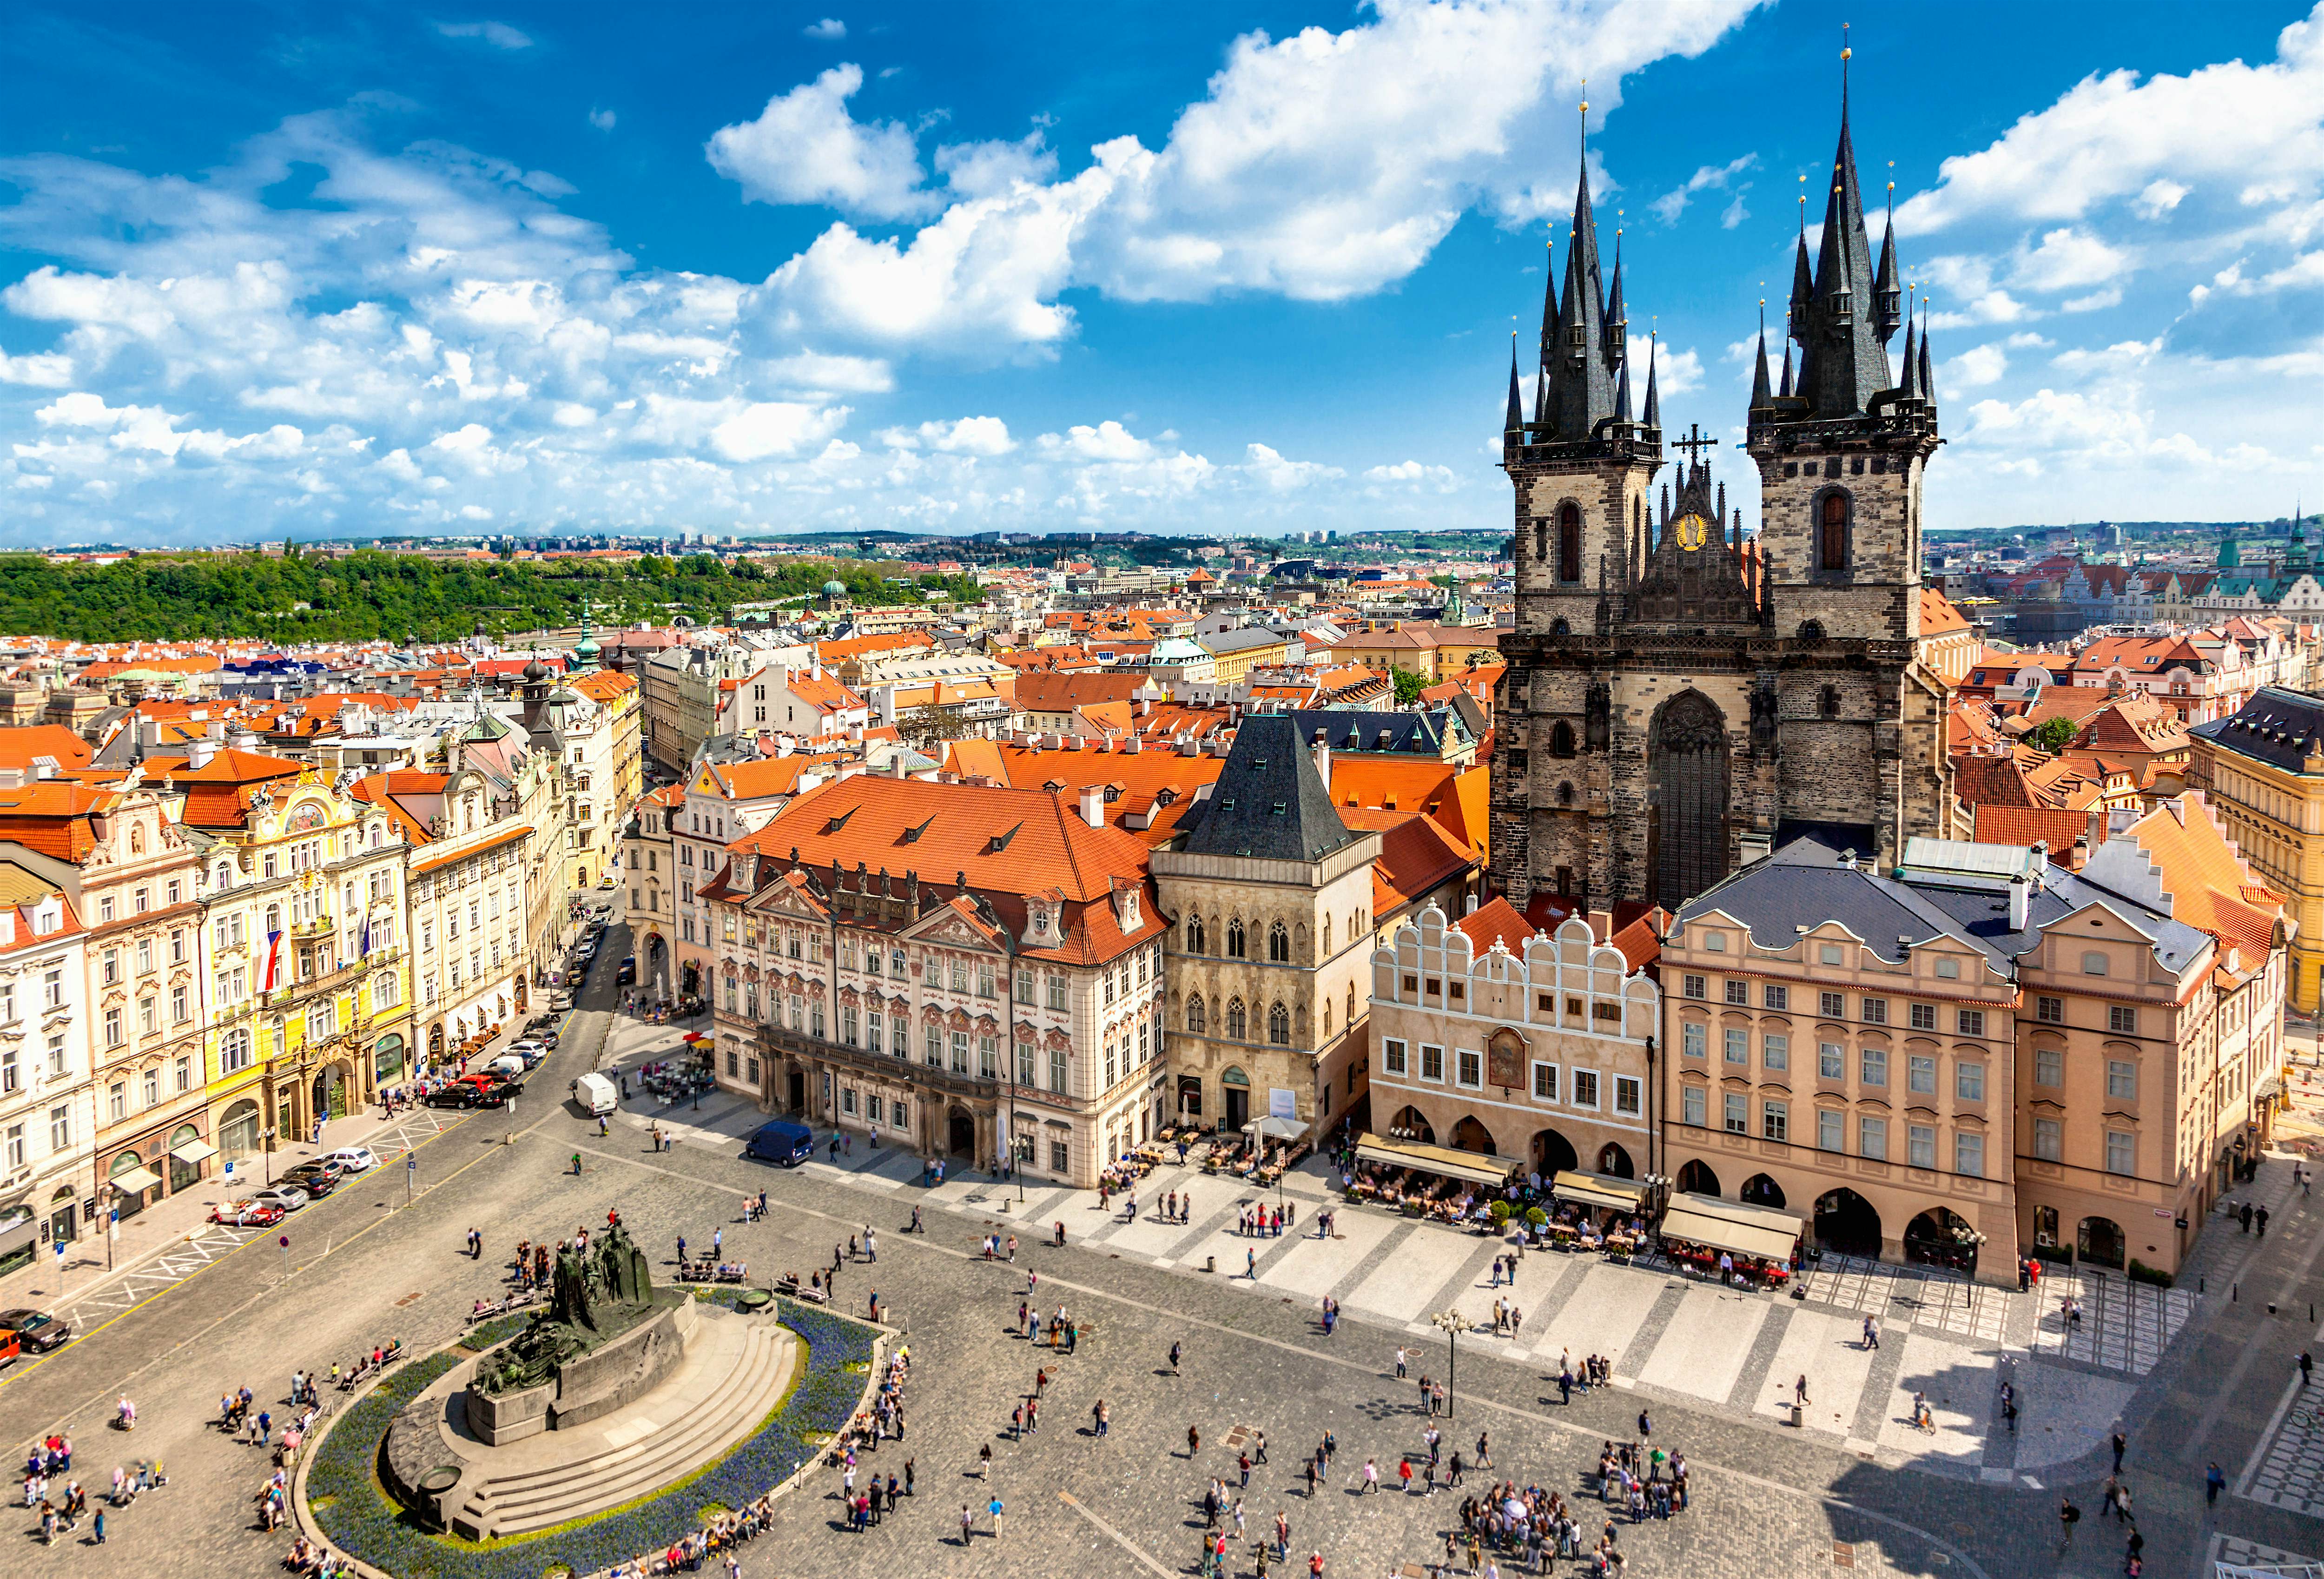 Prague seeks restrictions on Airbnb to curb overtourism - Lonely Planet